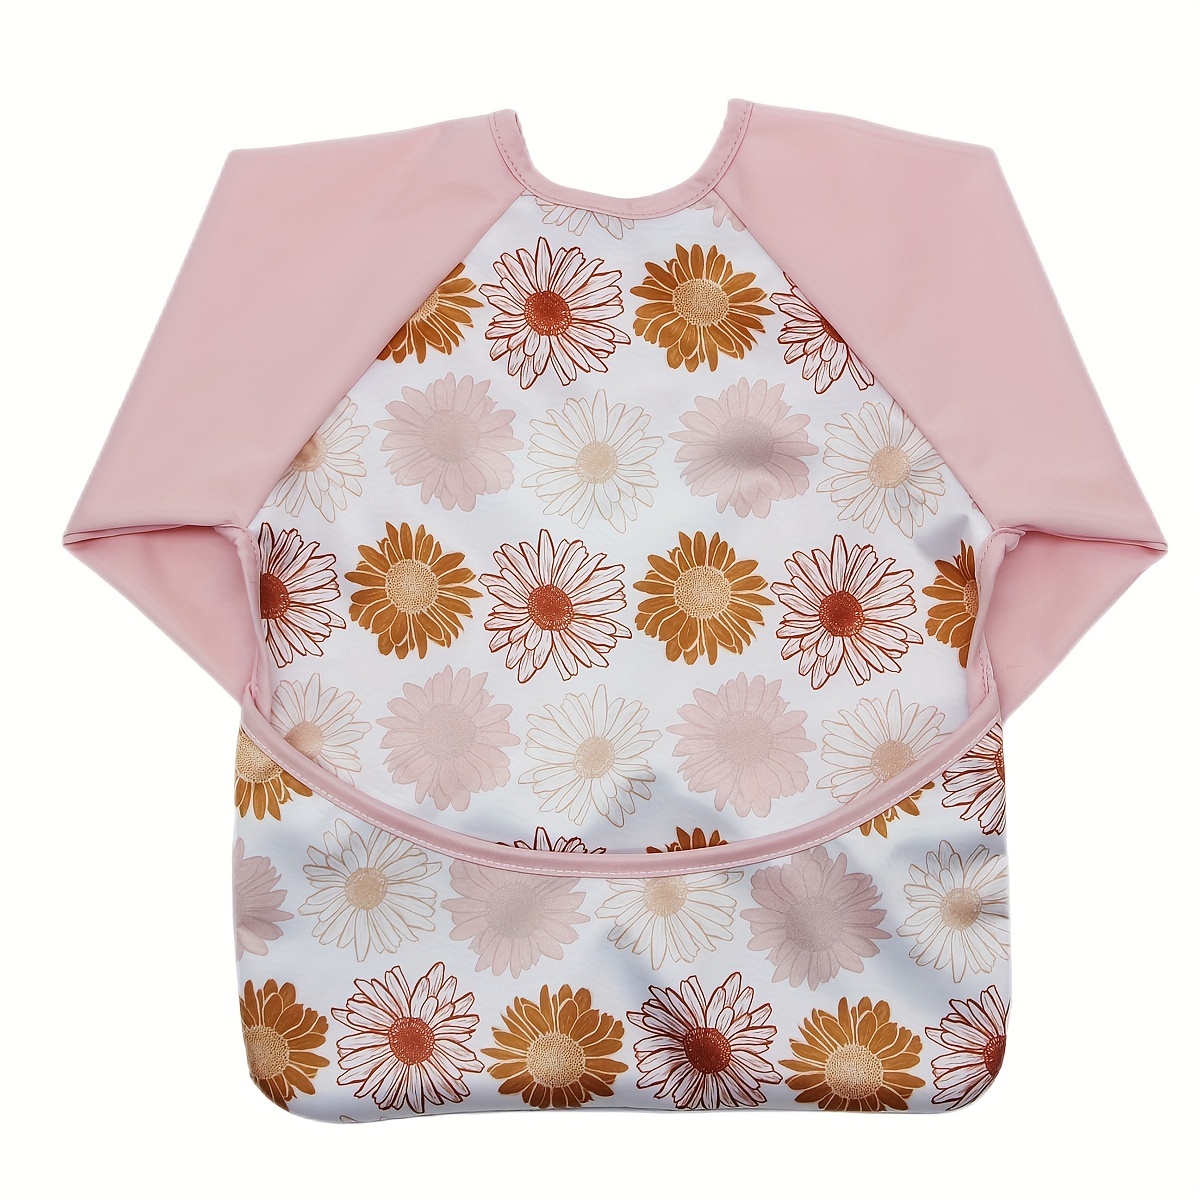 

New Year Gift Idea: Waterproof Flower Print Feeding Bibs For Babies 6-54 Months - Reusable & Washable!